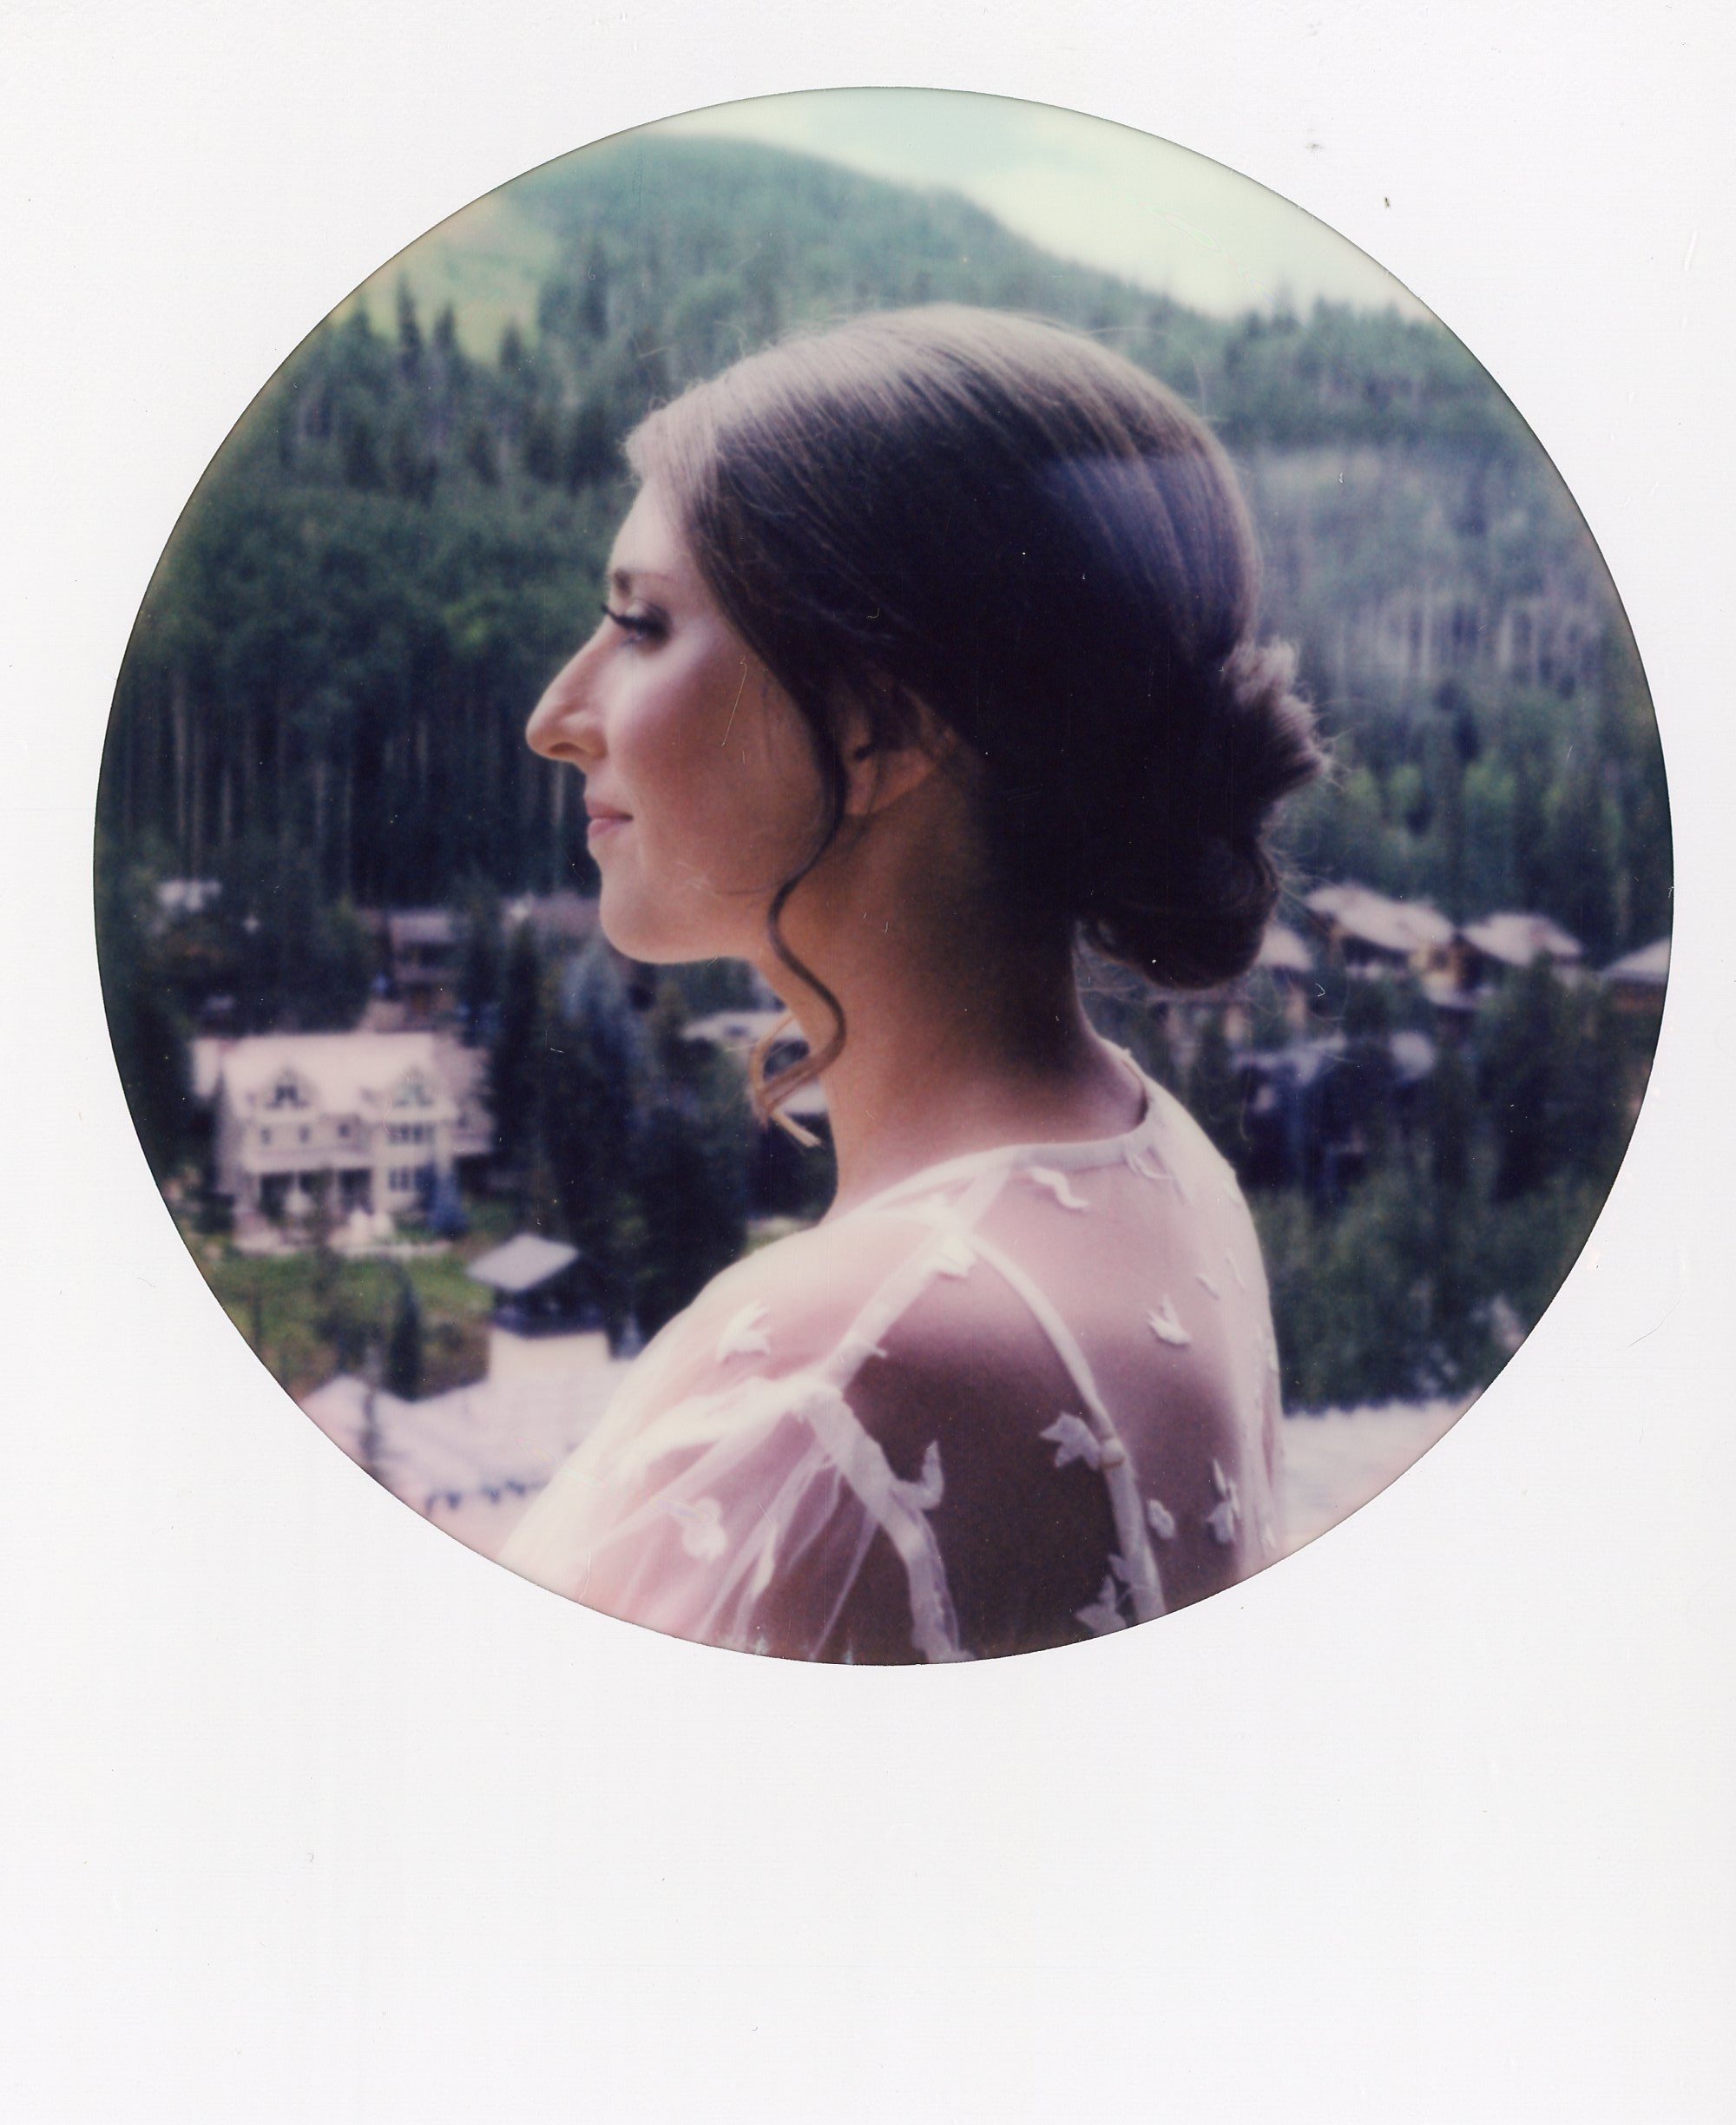 Bridal polaroid portrait taken in Vail, Colorado by Stephanie Mikuls Photography, a wedding photographer based in Colorado.